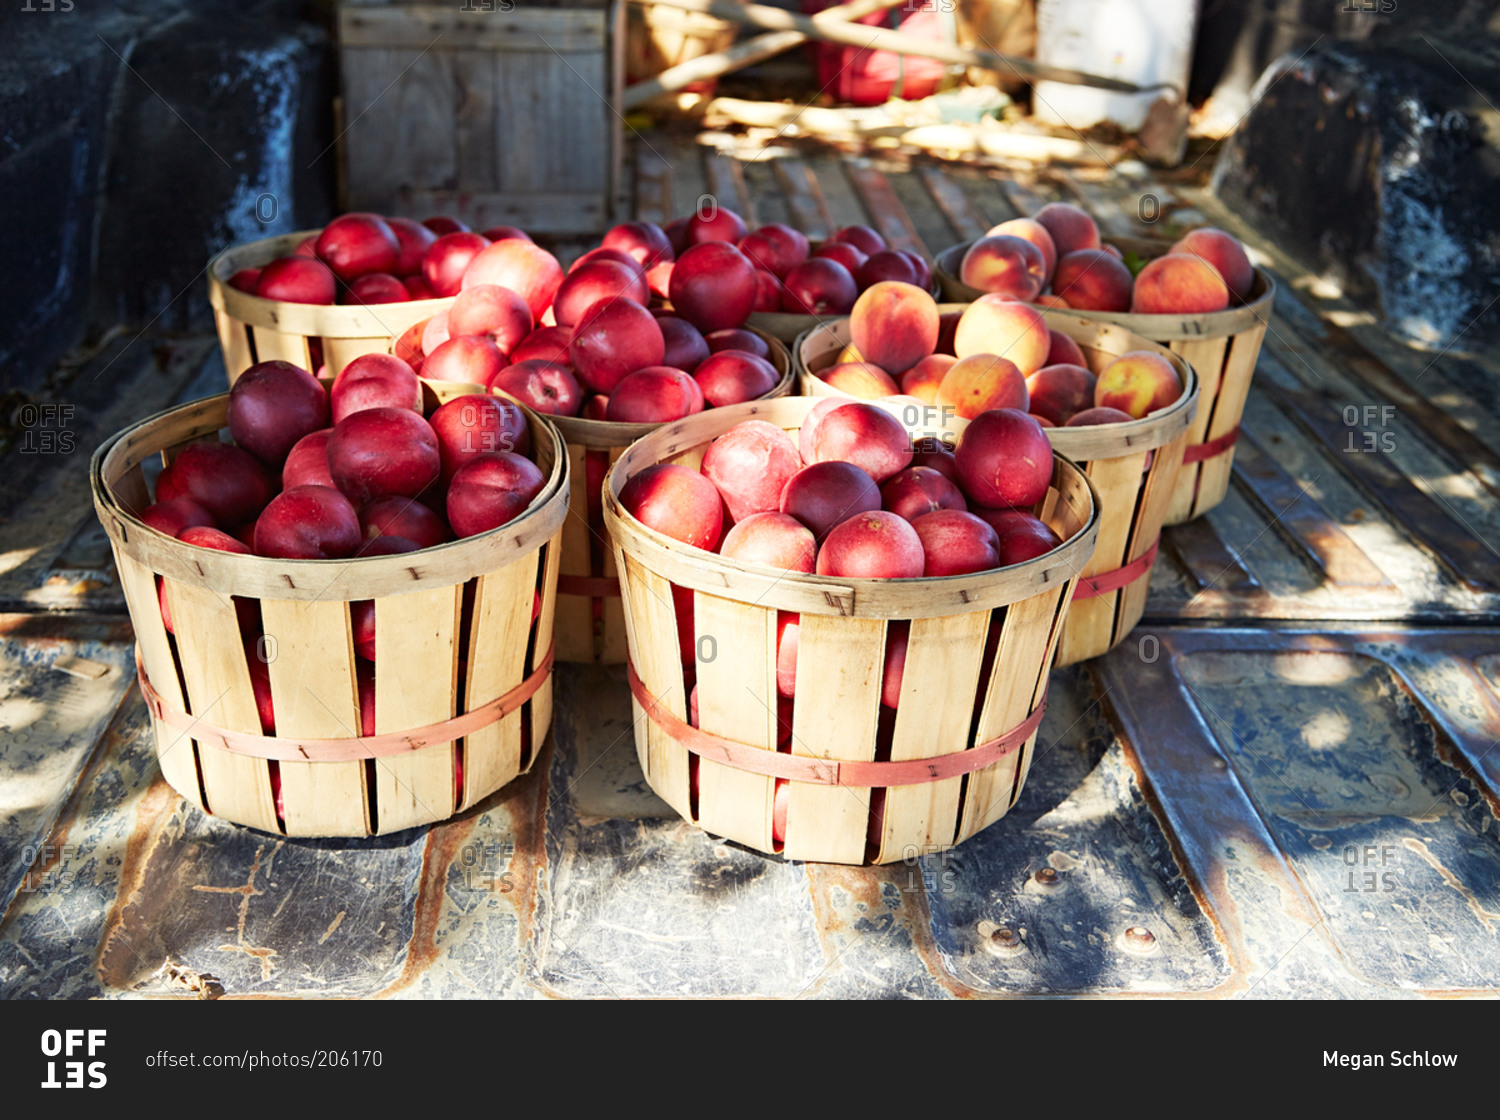 Baskets of freshly picked apples in a pickup truck